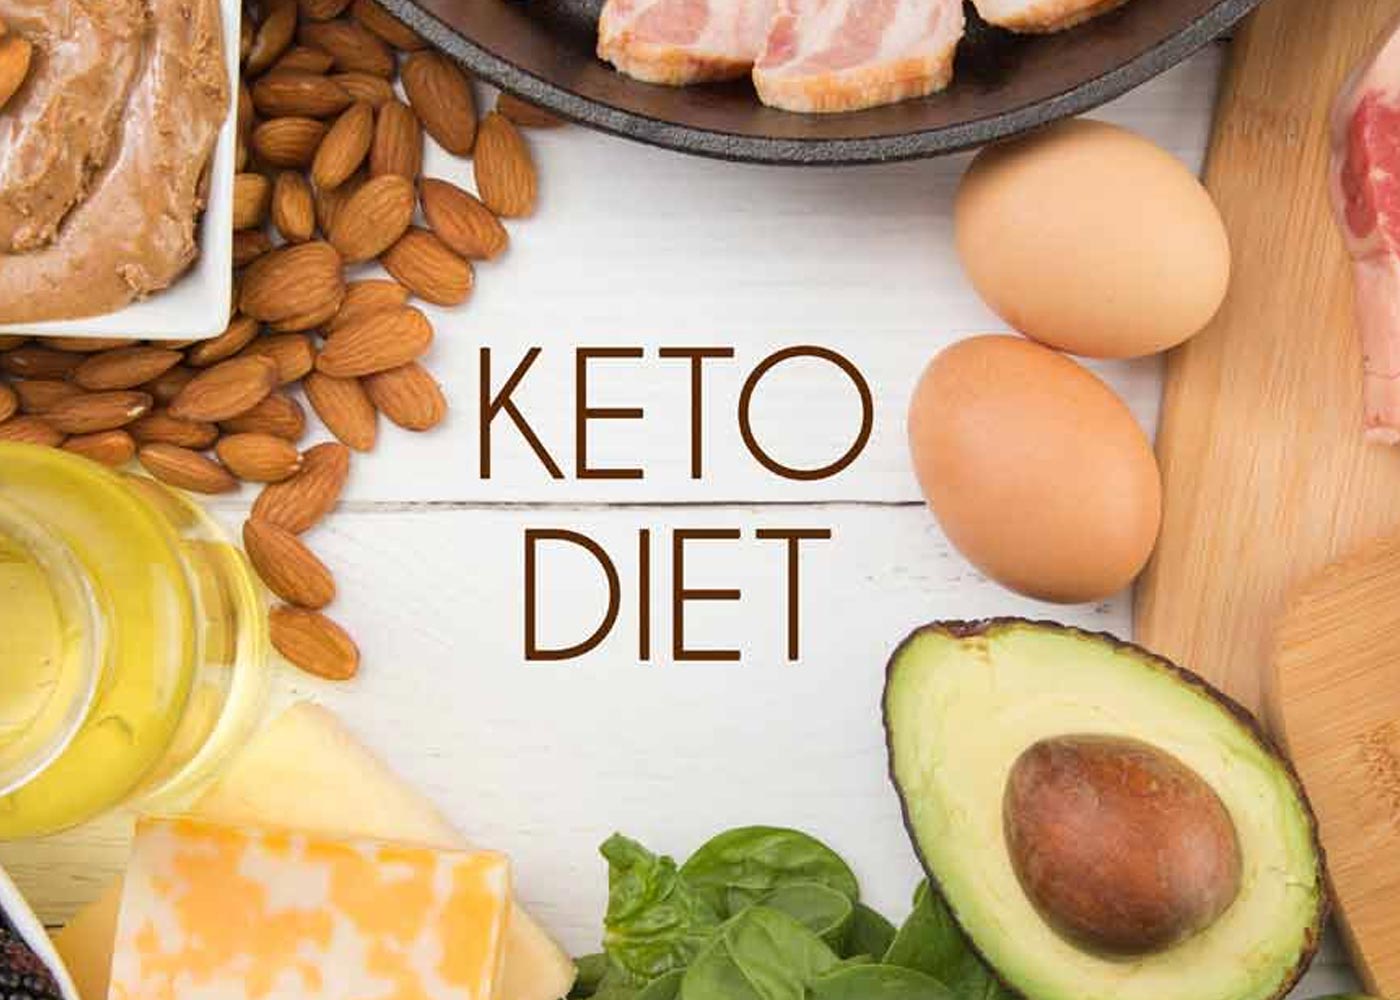 How Keto Diet Can Help You Lose Weight and Burn Fat